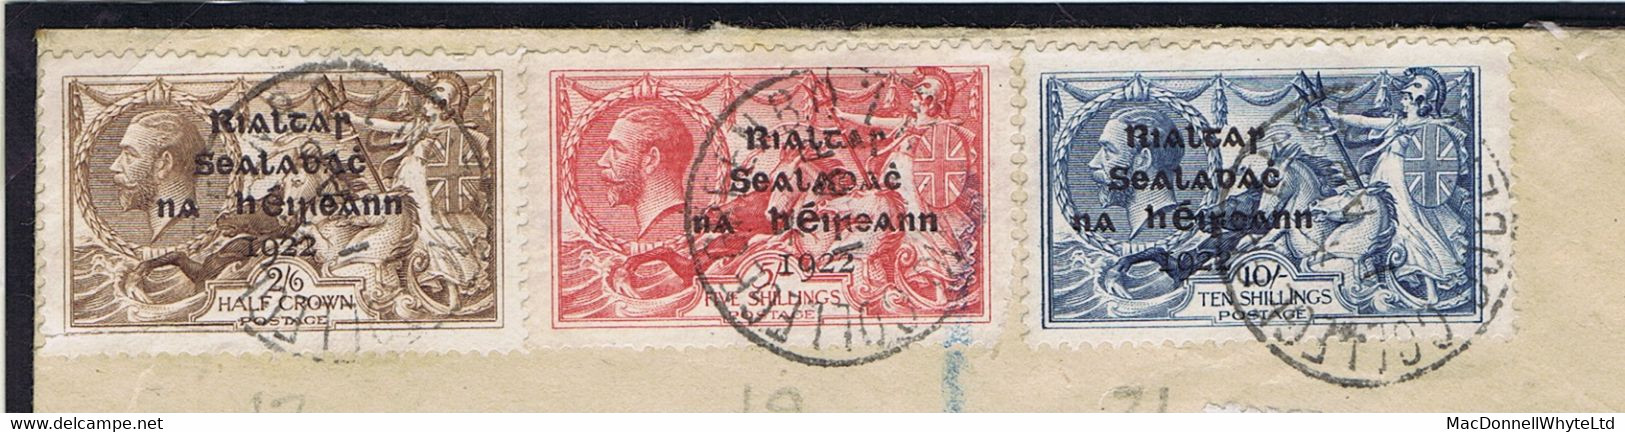 Ireland 1922 Rialtas Overprints First Day Of Irish Control Of Post Office Two Covers With Values To 10s Registered COLLE - Covers & Documents